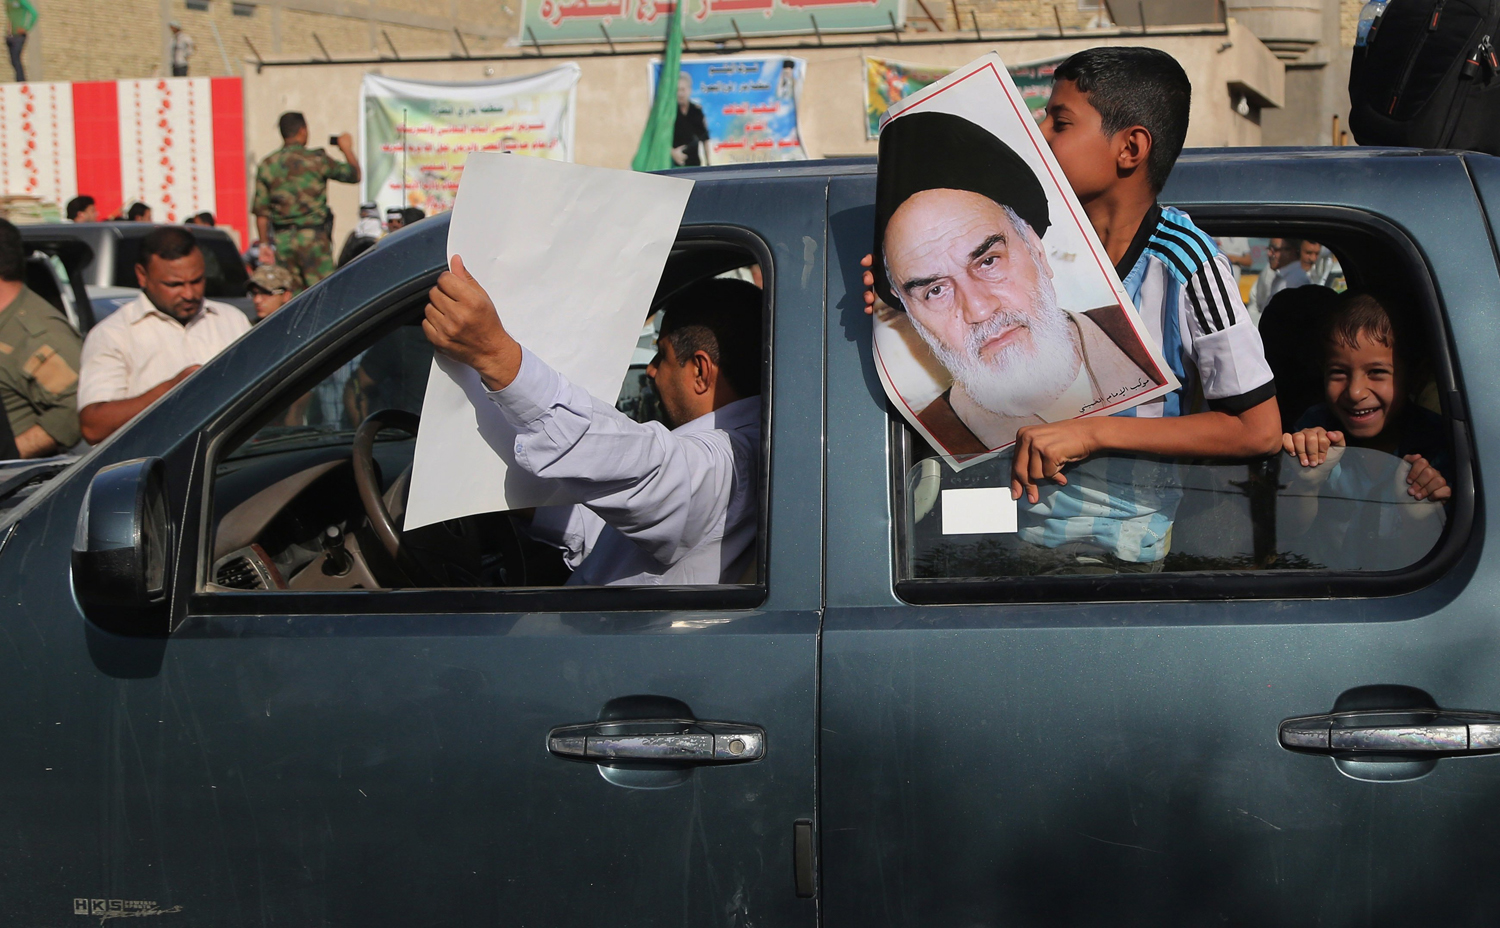 People hold posters showing Iran's spiritual leaders Ayatollah Khomeini, while Iraqi Shiite fighters deploy with their weapons in Basra, Iraq's second-largest city, 340 southeast of Baghdad, June 14.